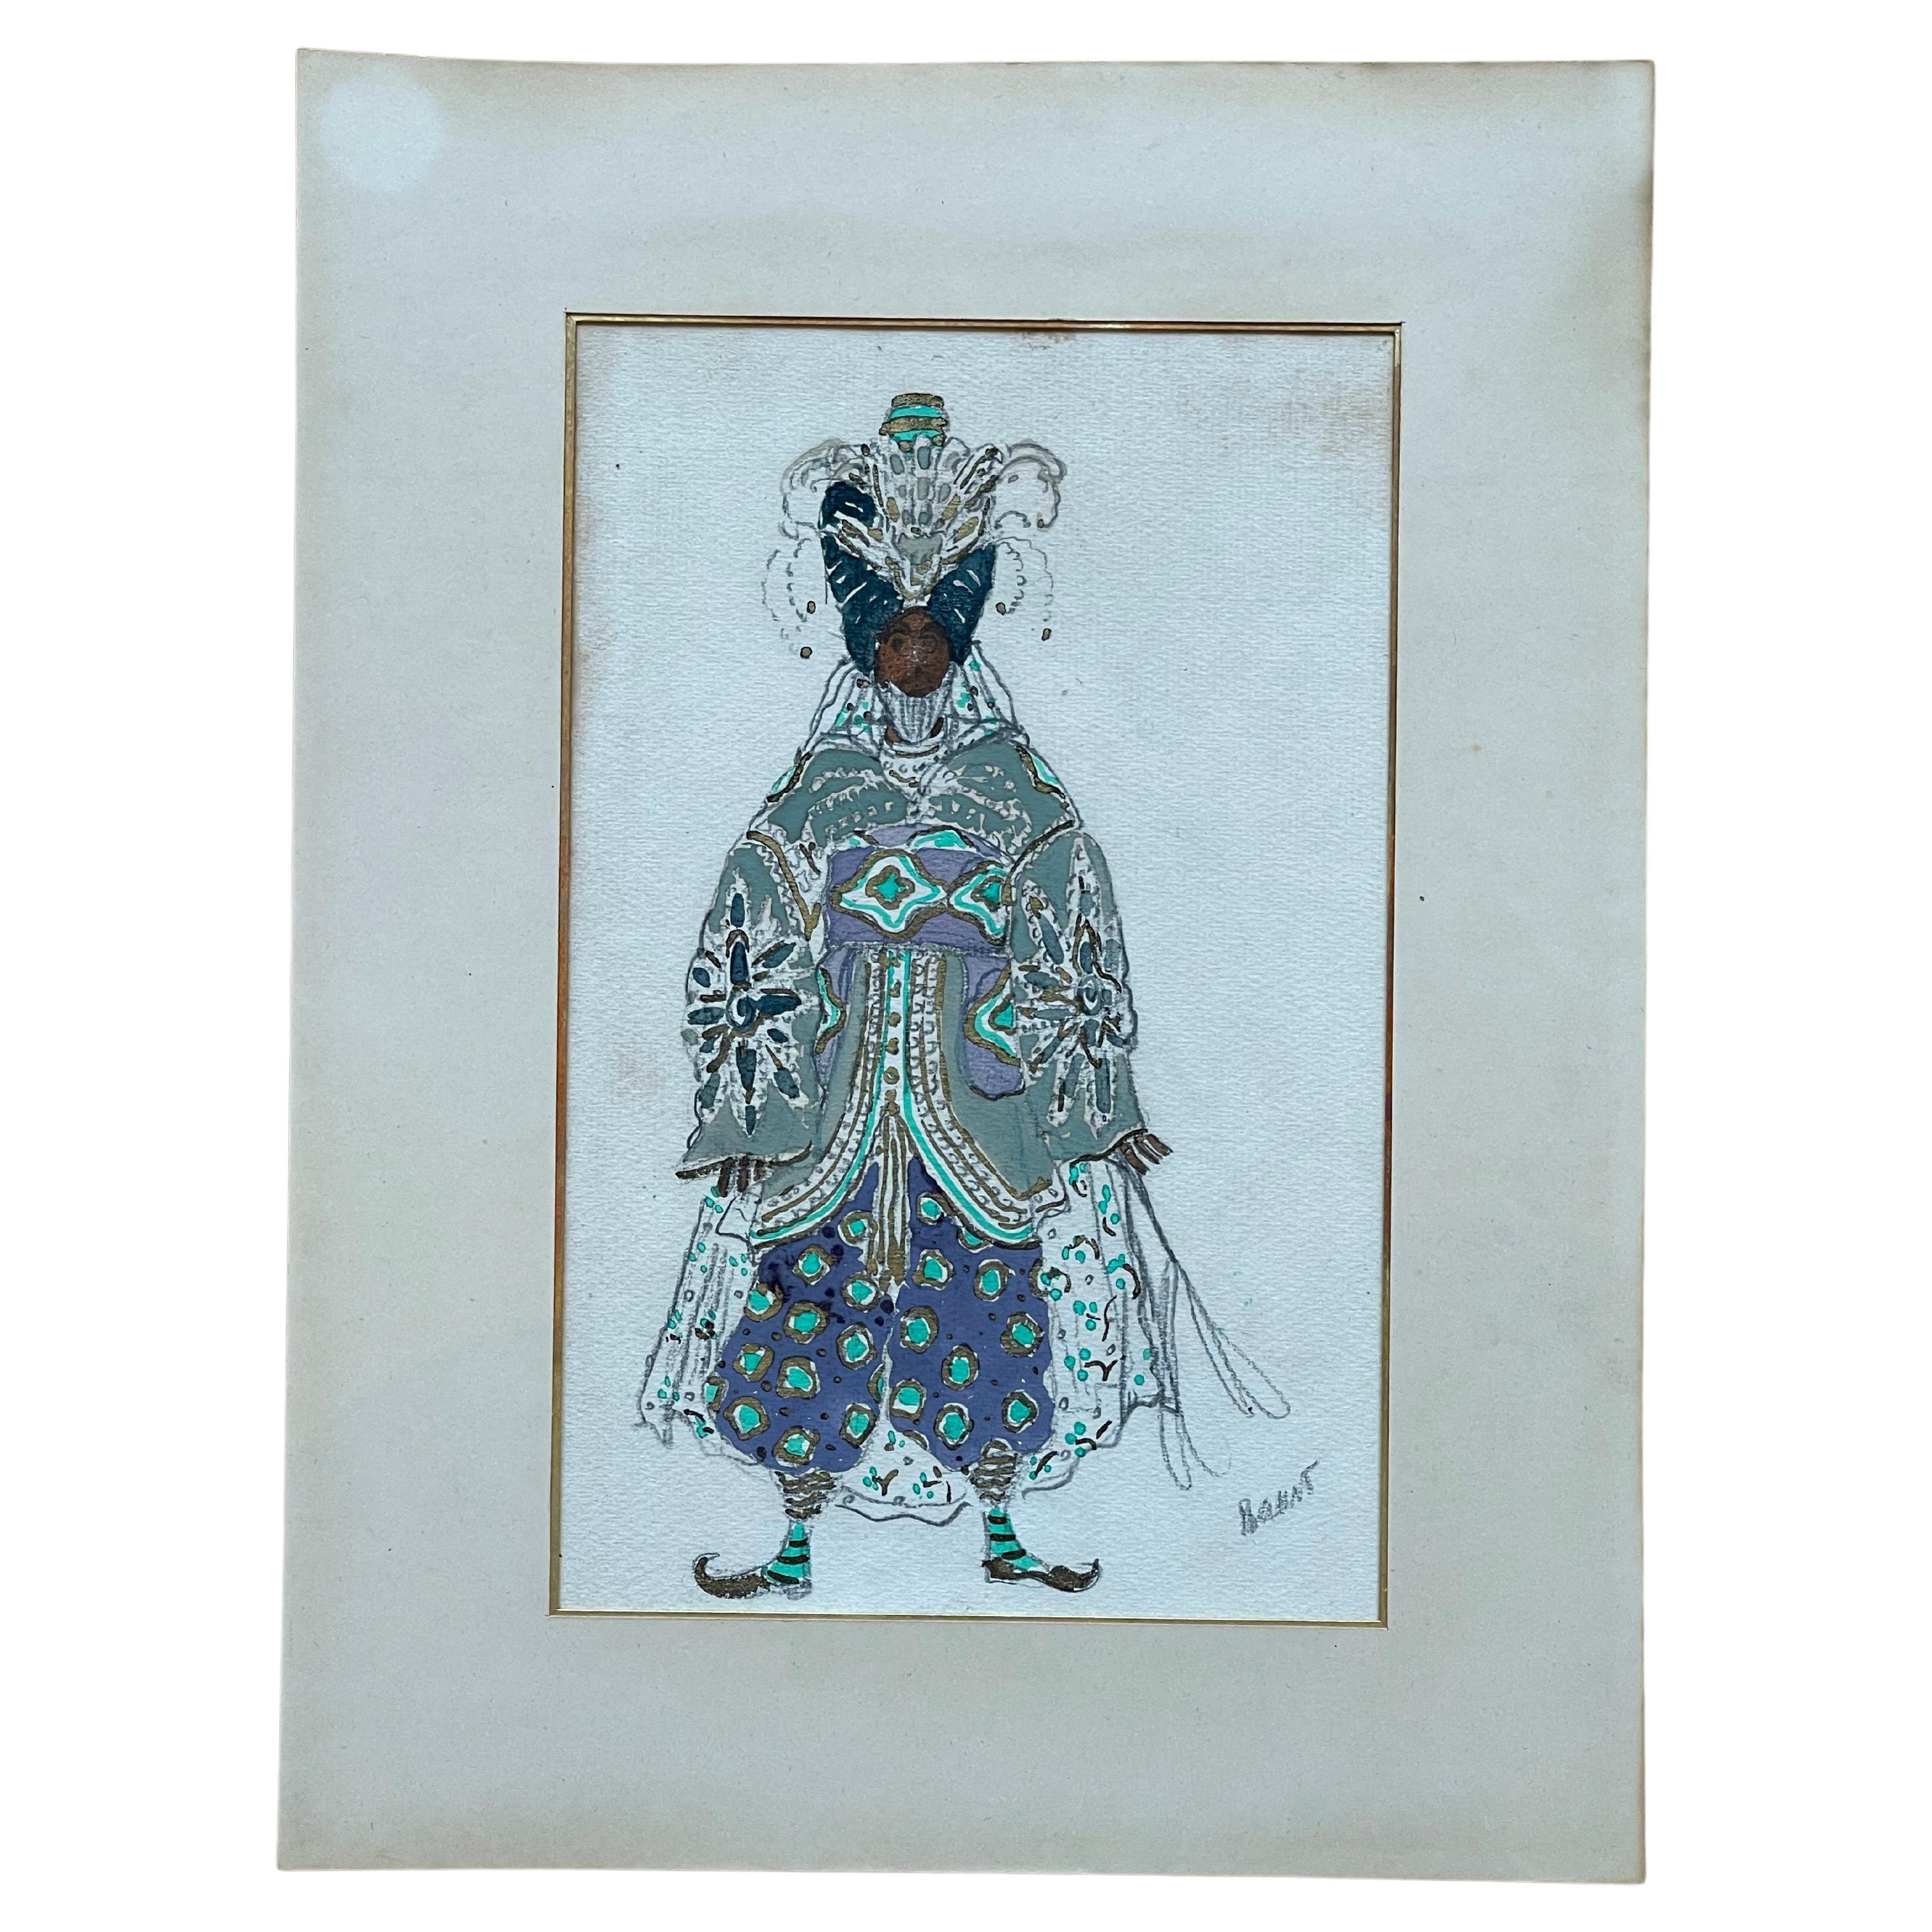  Beautiful study of a ballet costume by Léon Bakst (1866-1924) from 1919. 

This painting was created by Léon Bakst, painter, illustrator and costume designer for the  Russian Ballets from 1909 to 1921. He designed costumes inspirated by oriental